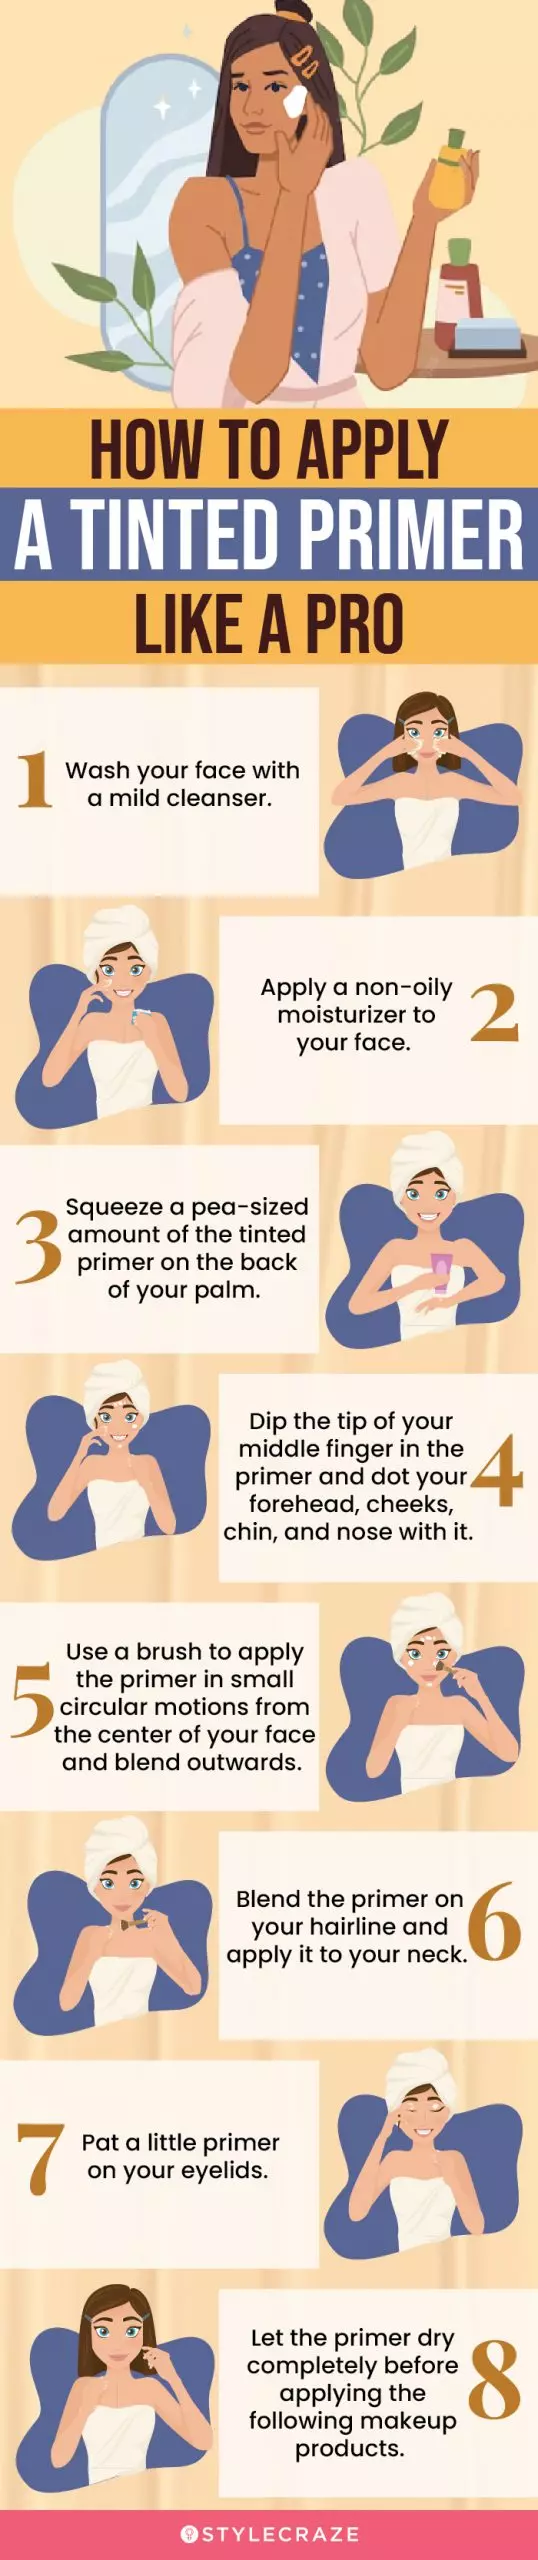 How To Apply A Tinted Primer Like A Pro (infographic)